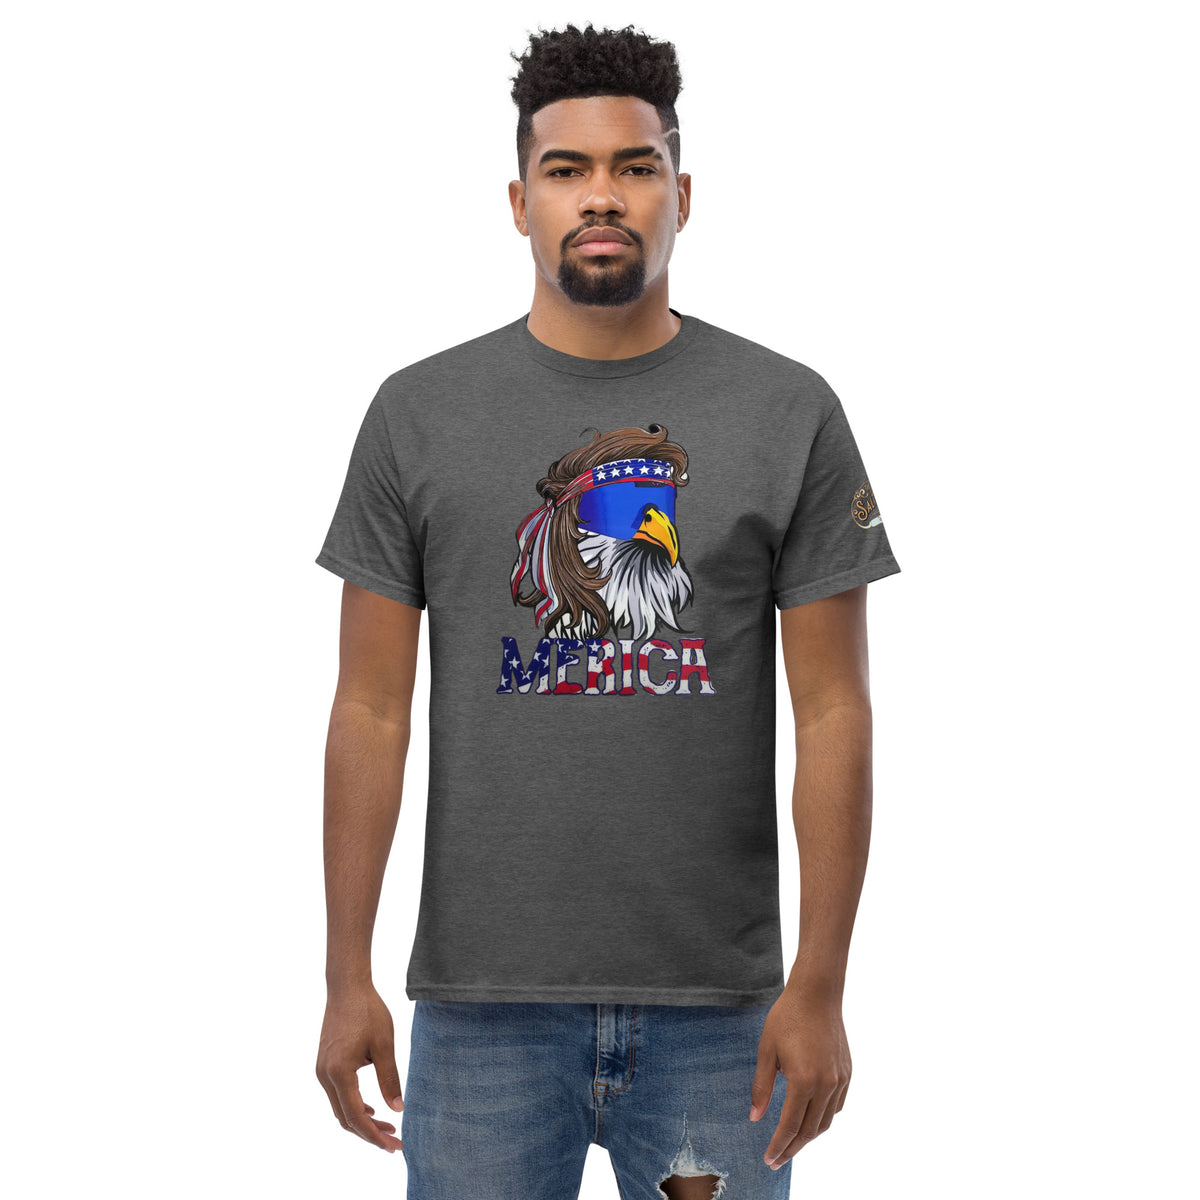 The Salty Medic Clothing Co proudly presents the "Freedom Eagle" T-shirt